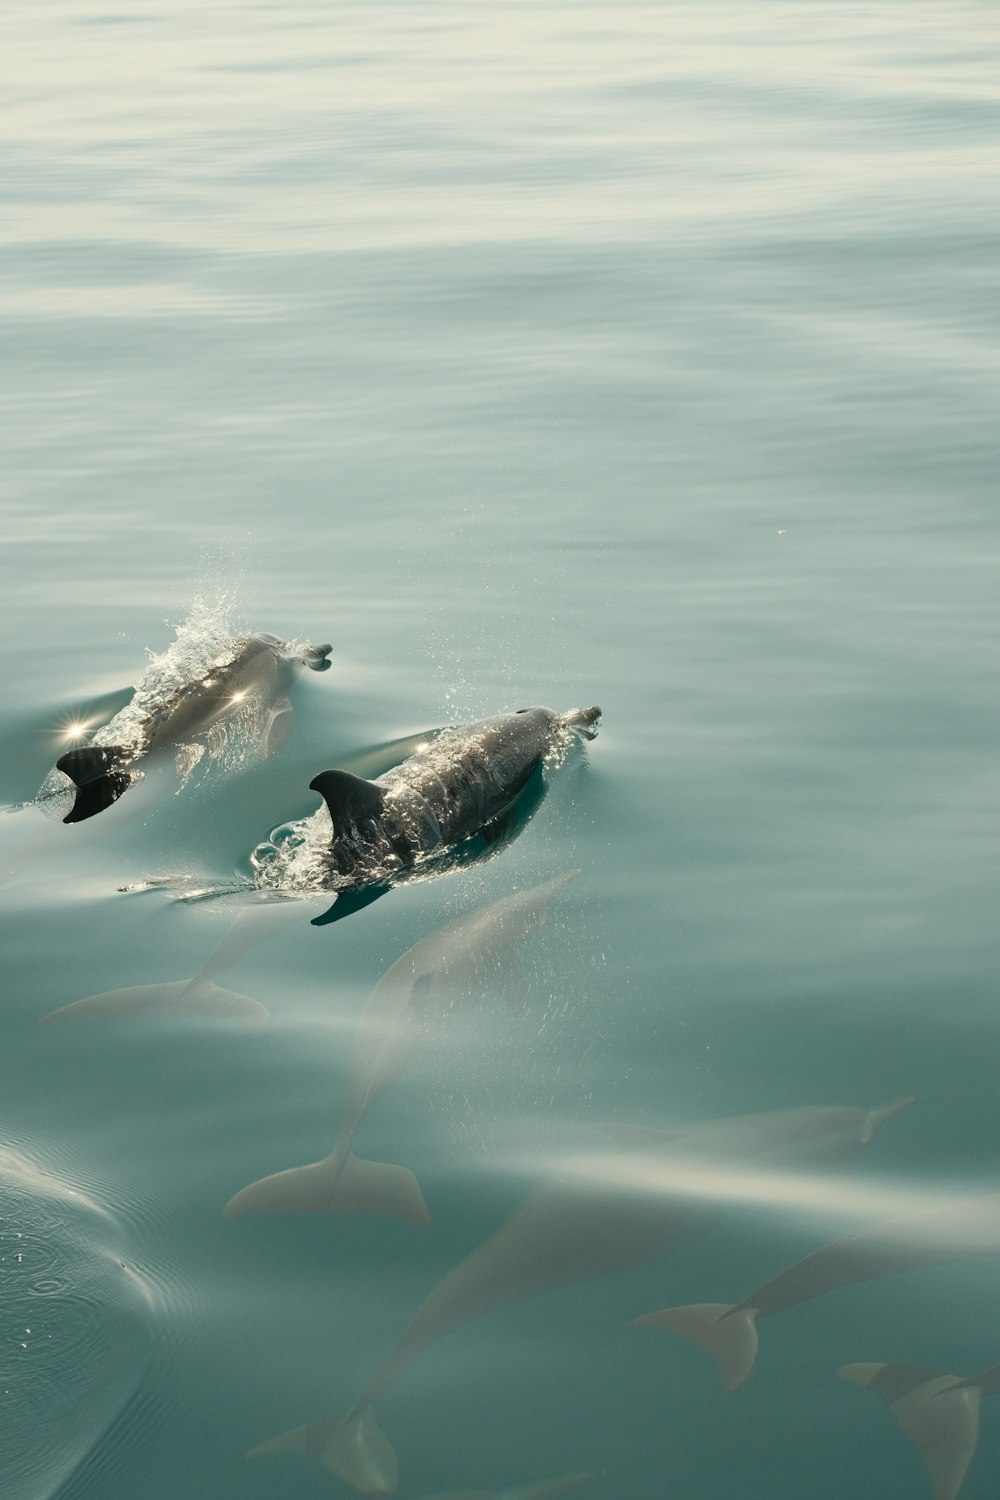 a group of dolphins swimming in a body of water